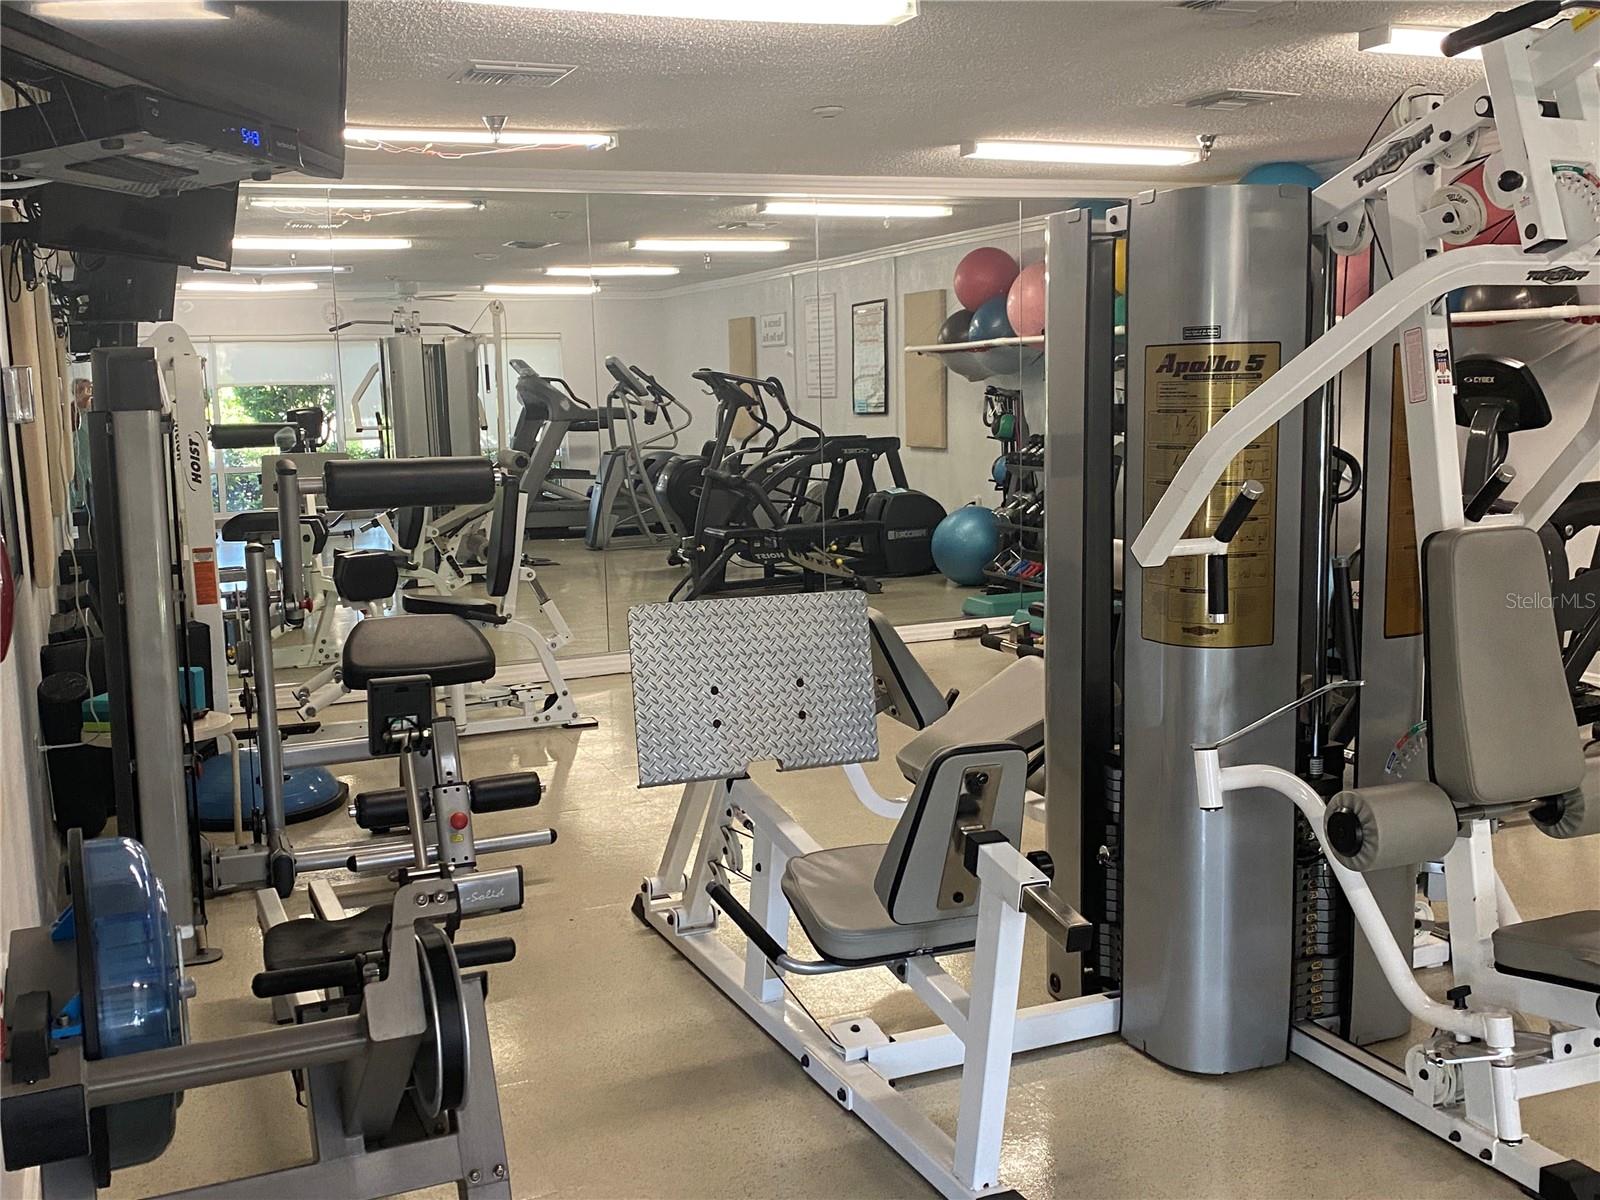 Fitness center in clubhouse